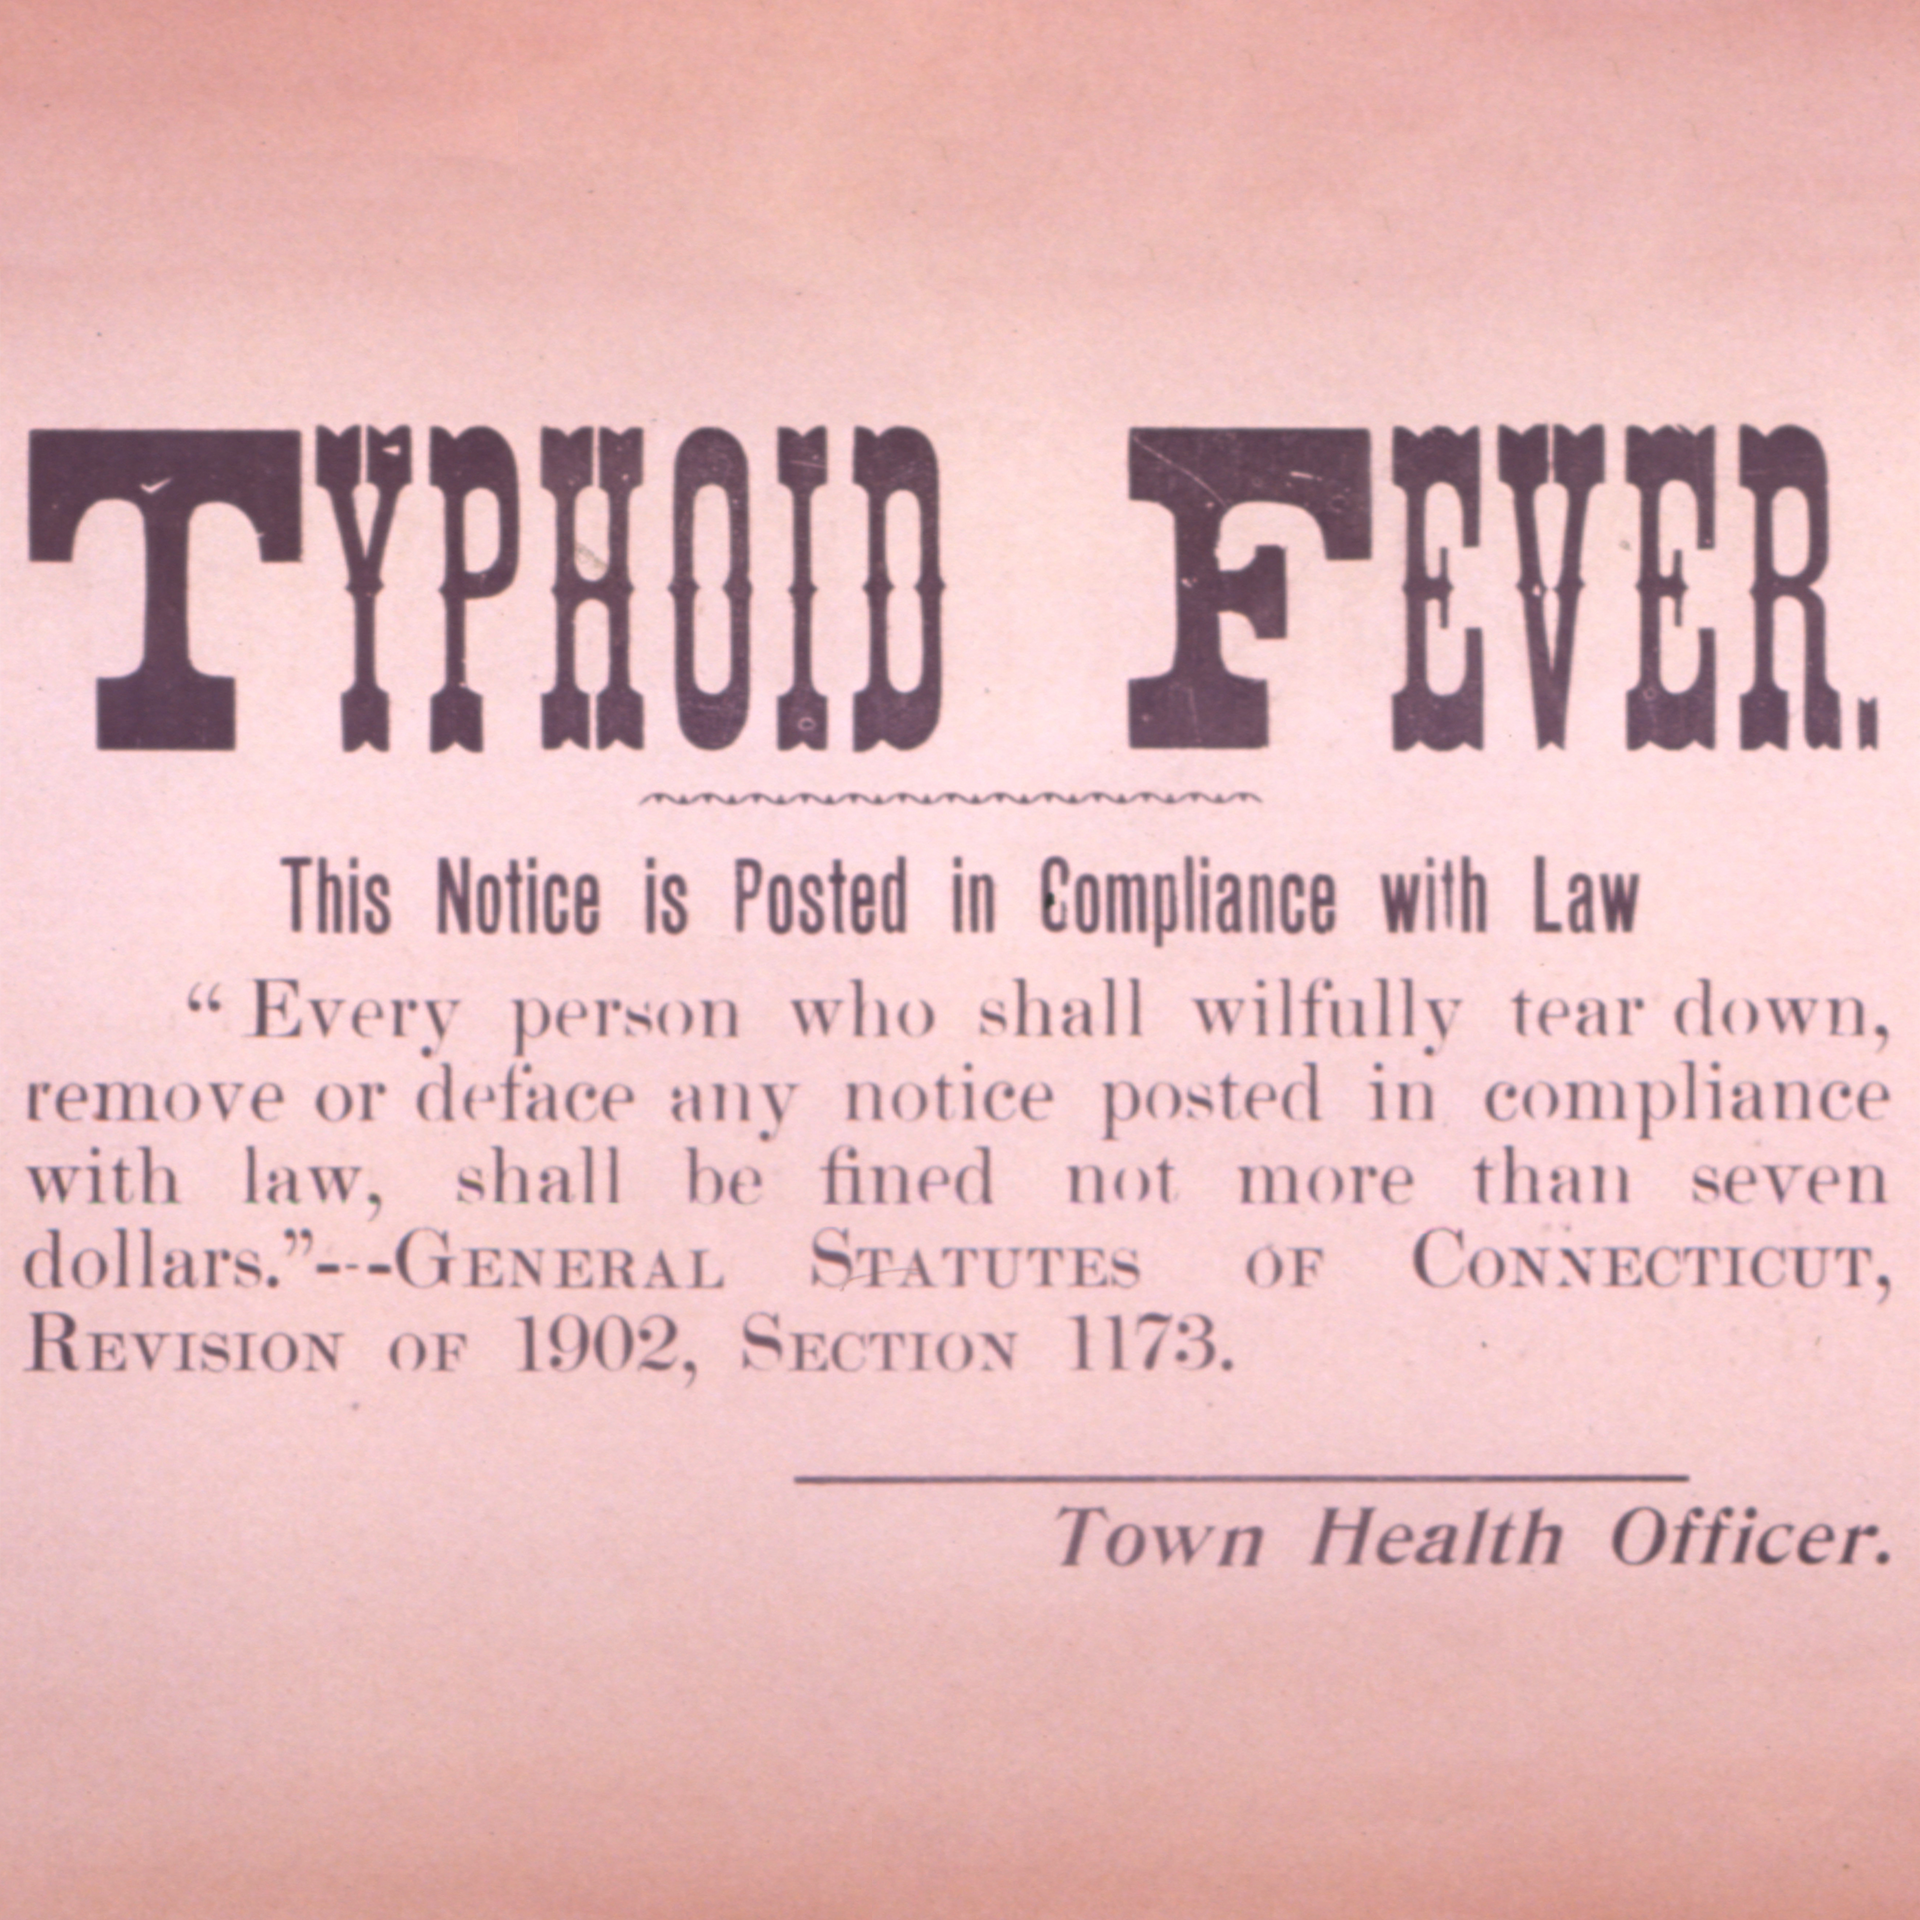 a typhoid fever isolation sign from the early 20th century